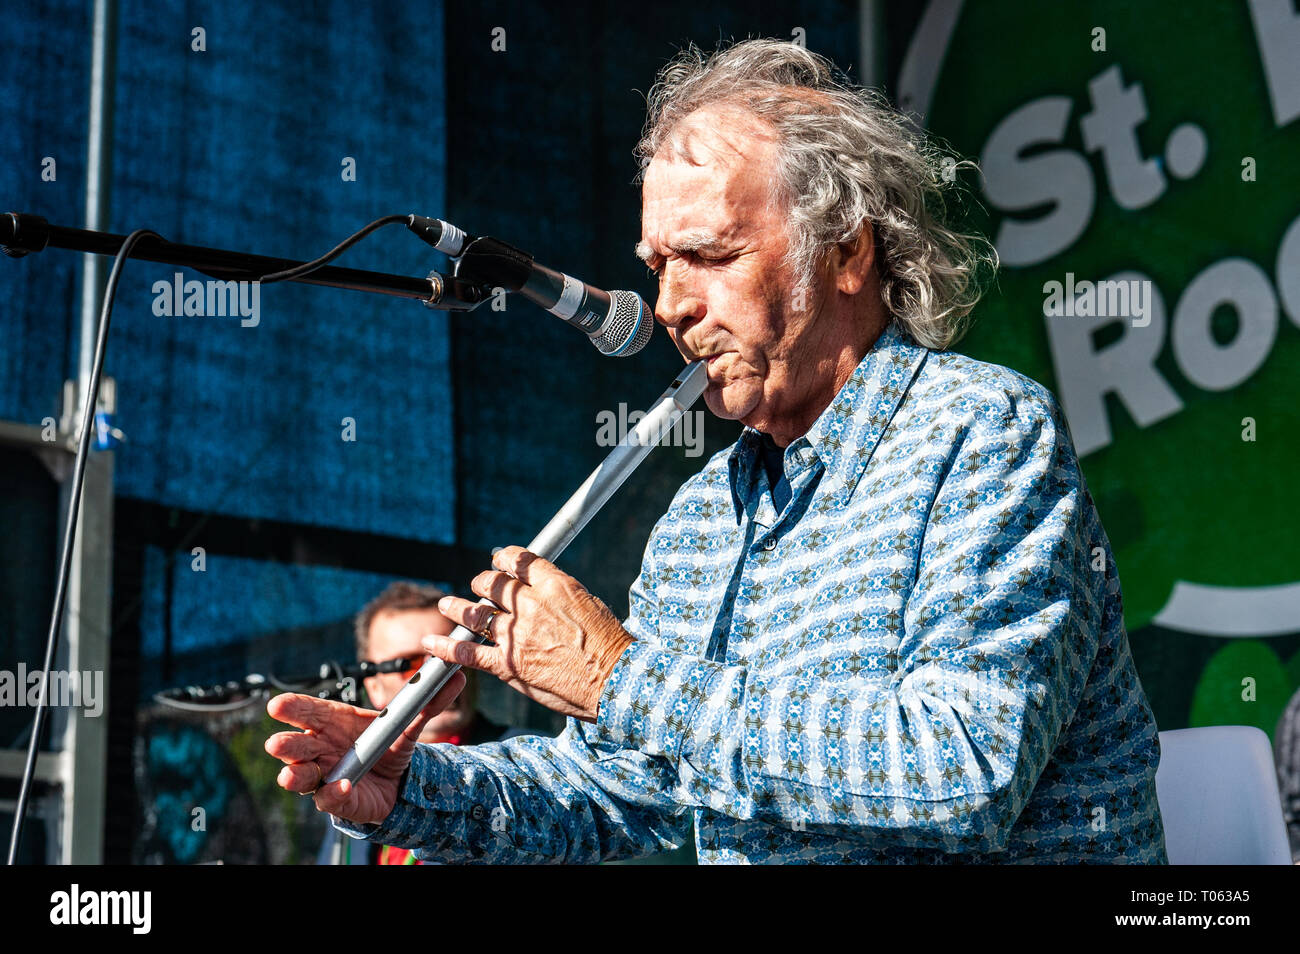 Birmingham, UK. 17th March, 2019.  Finbar Furey headlined 'St Pat Rocks', a live gig featuring Irish oriented acts after the Birmingham St. Patrick's Day parade, which drew crowds of 90,000 people. Credit: Andy Gibson/Alamy Live News. Stock Photo